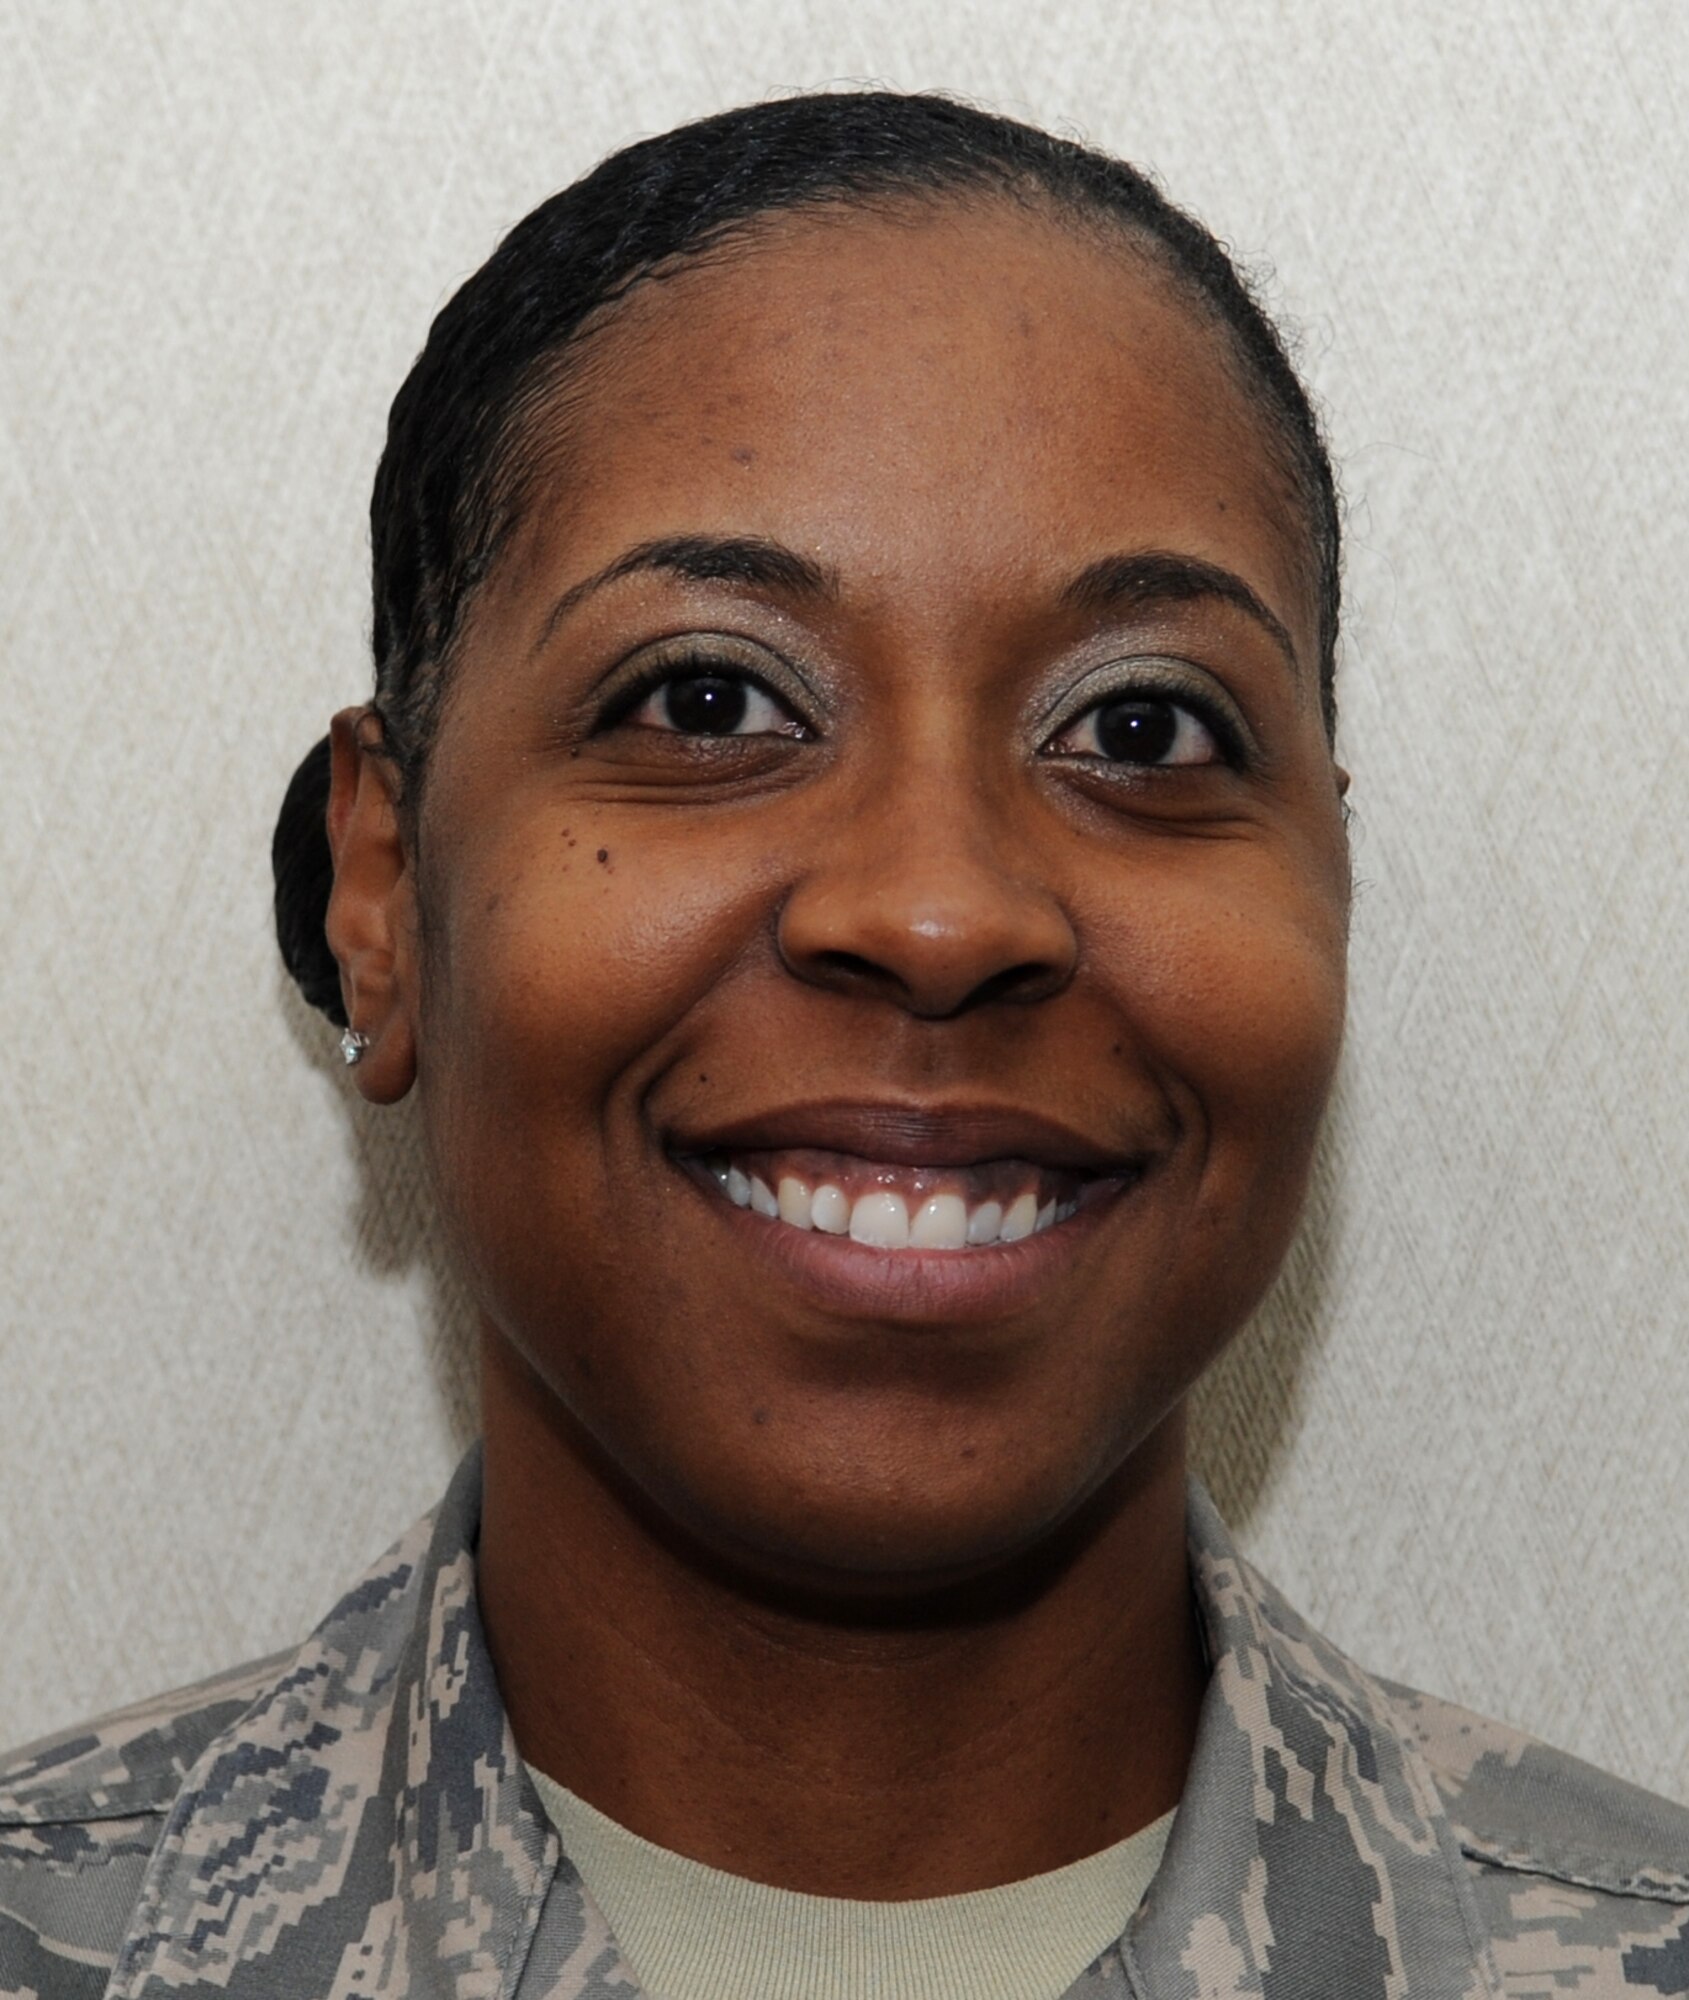 Tech. Sgt. Kimberly Young 633rd Air Base Wing Safety
“I abide by information assurance training.”
